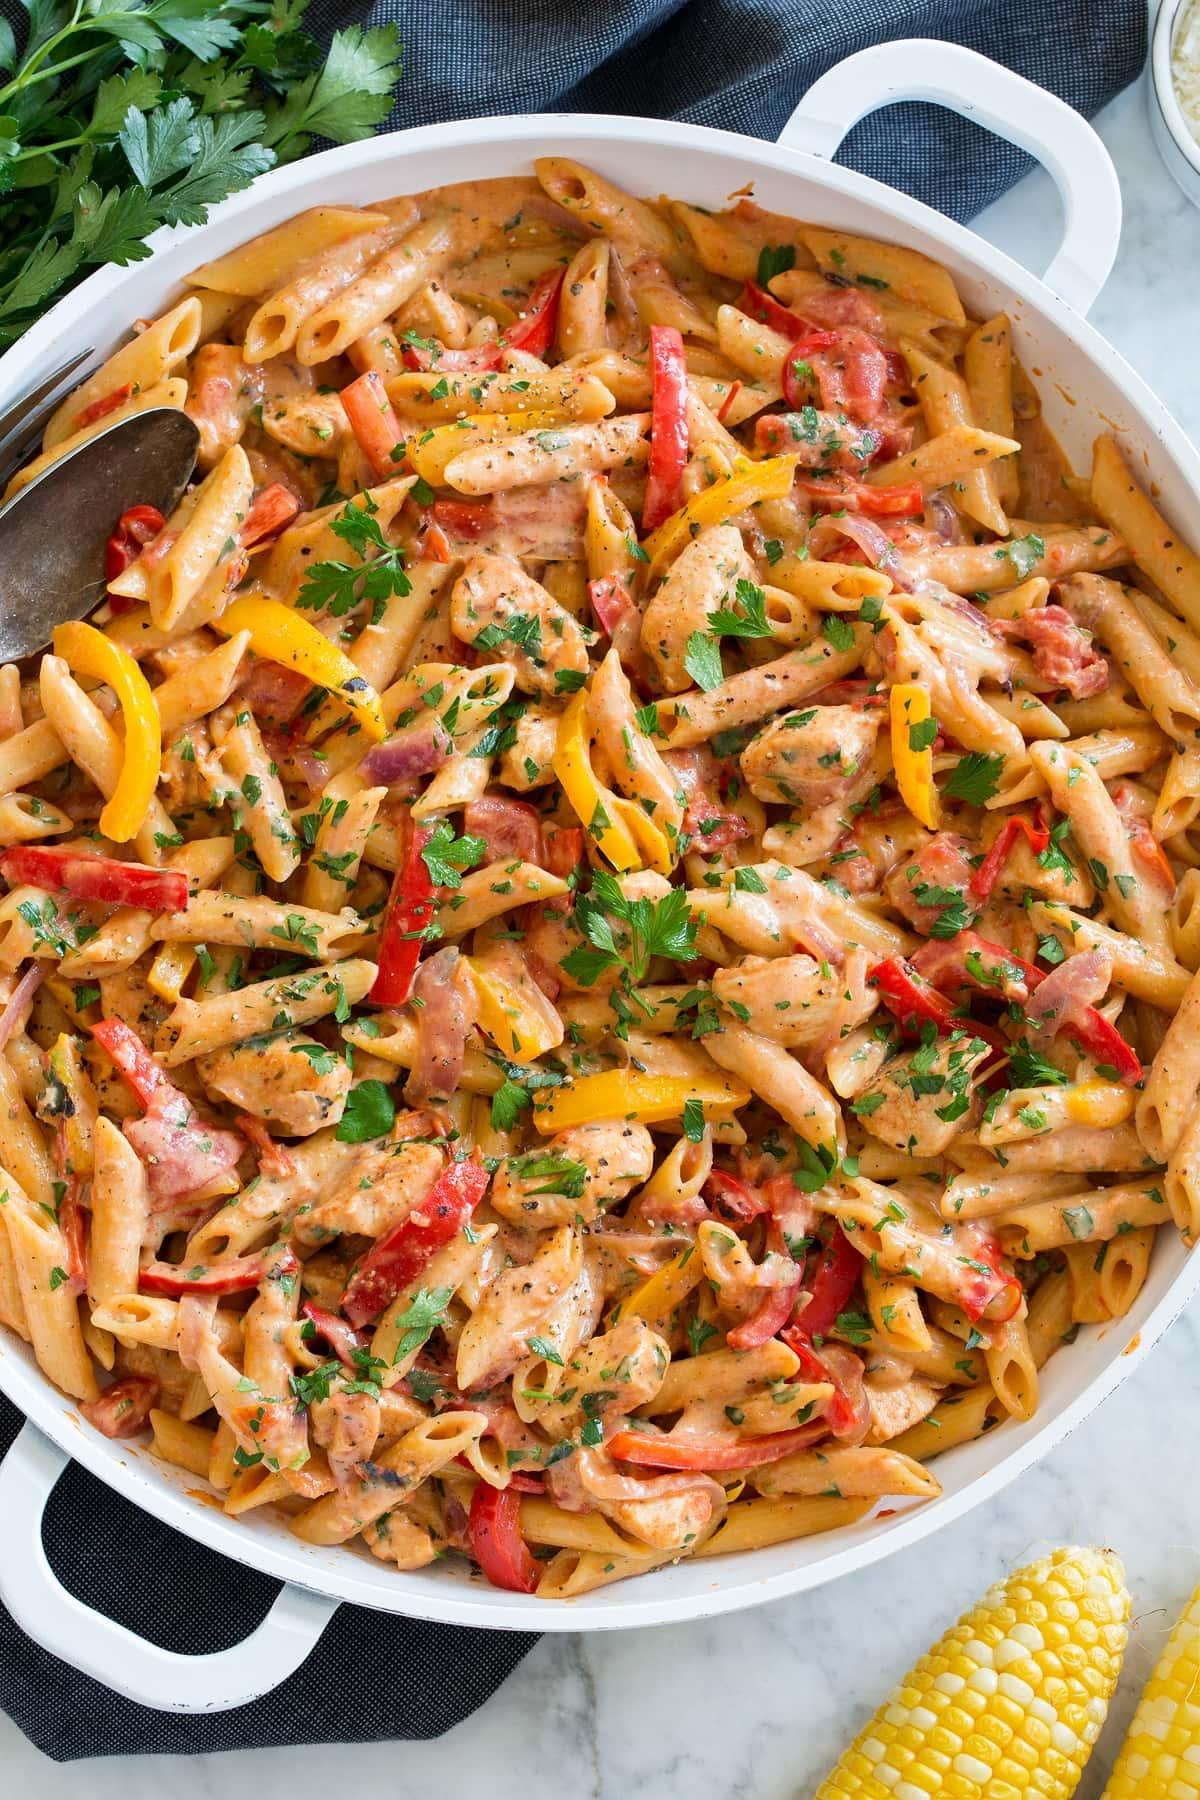 Spice up Your Life with a Delicious Cajun Pasta Recipe